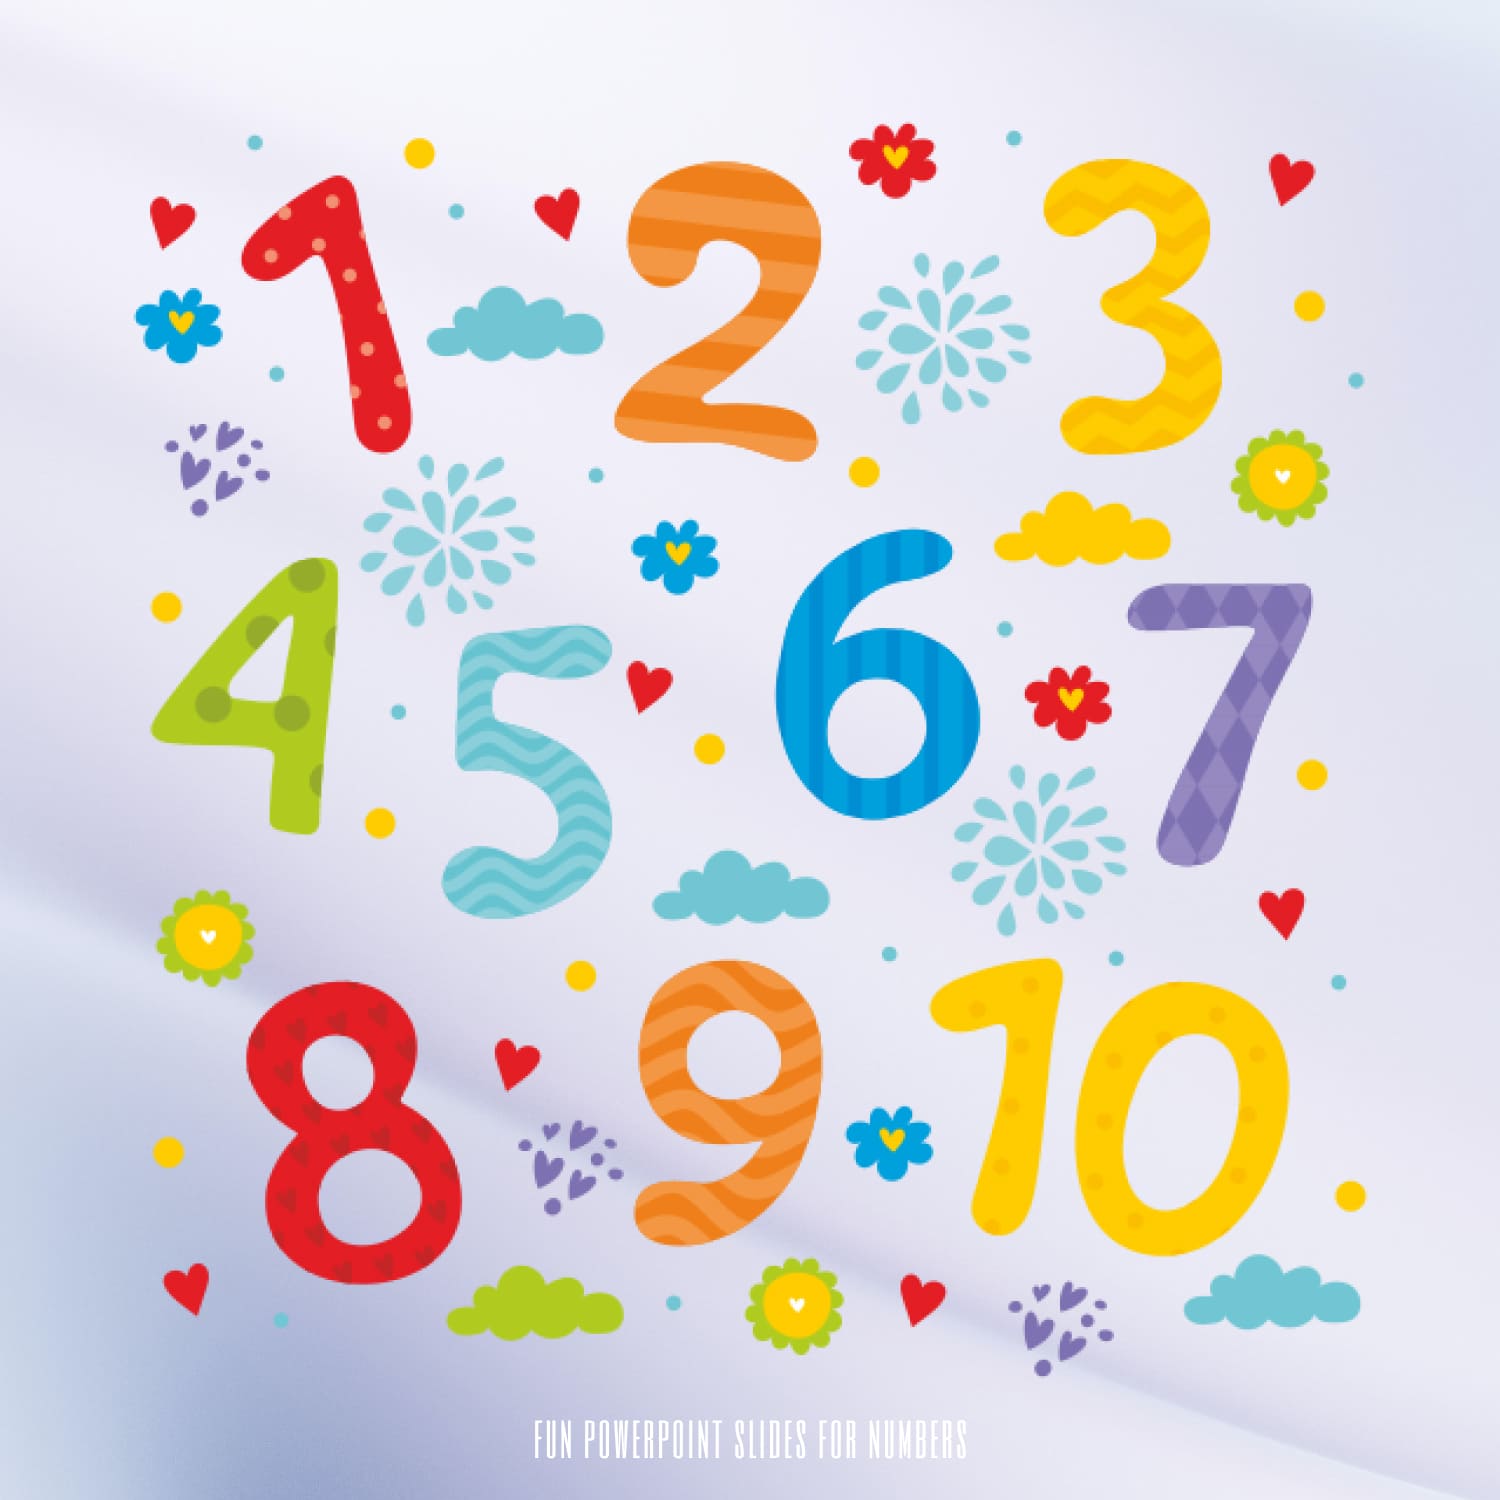 Fun Powerpoint Slides For Numbers cover image.